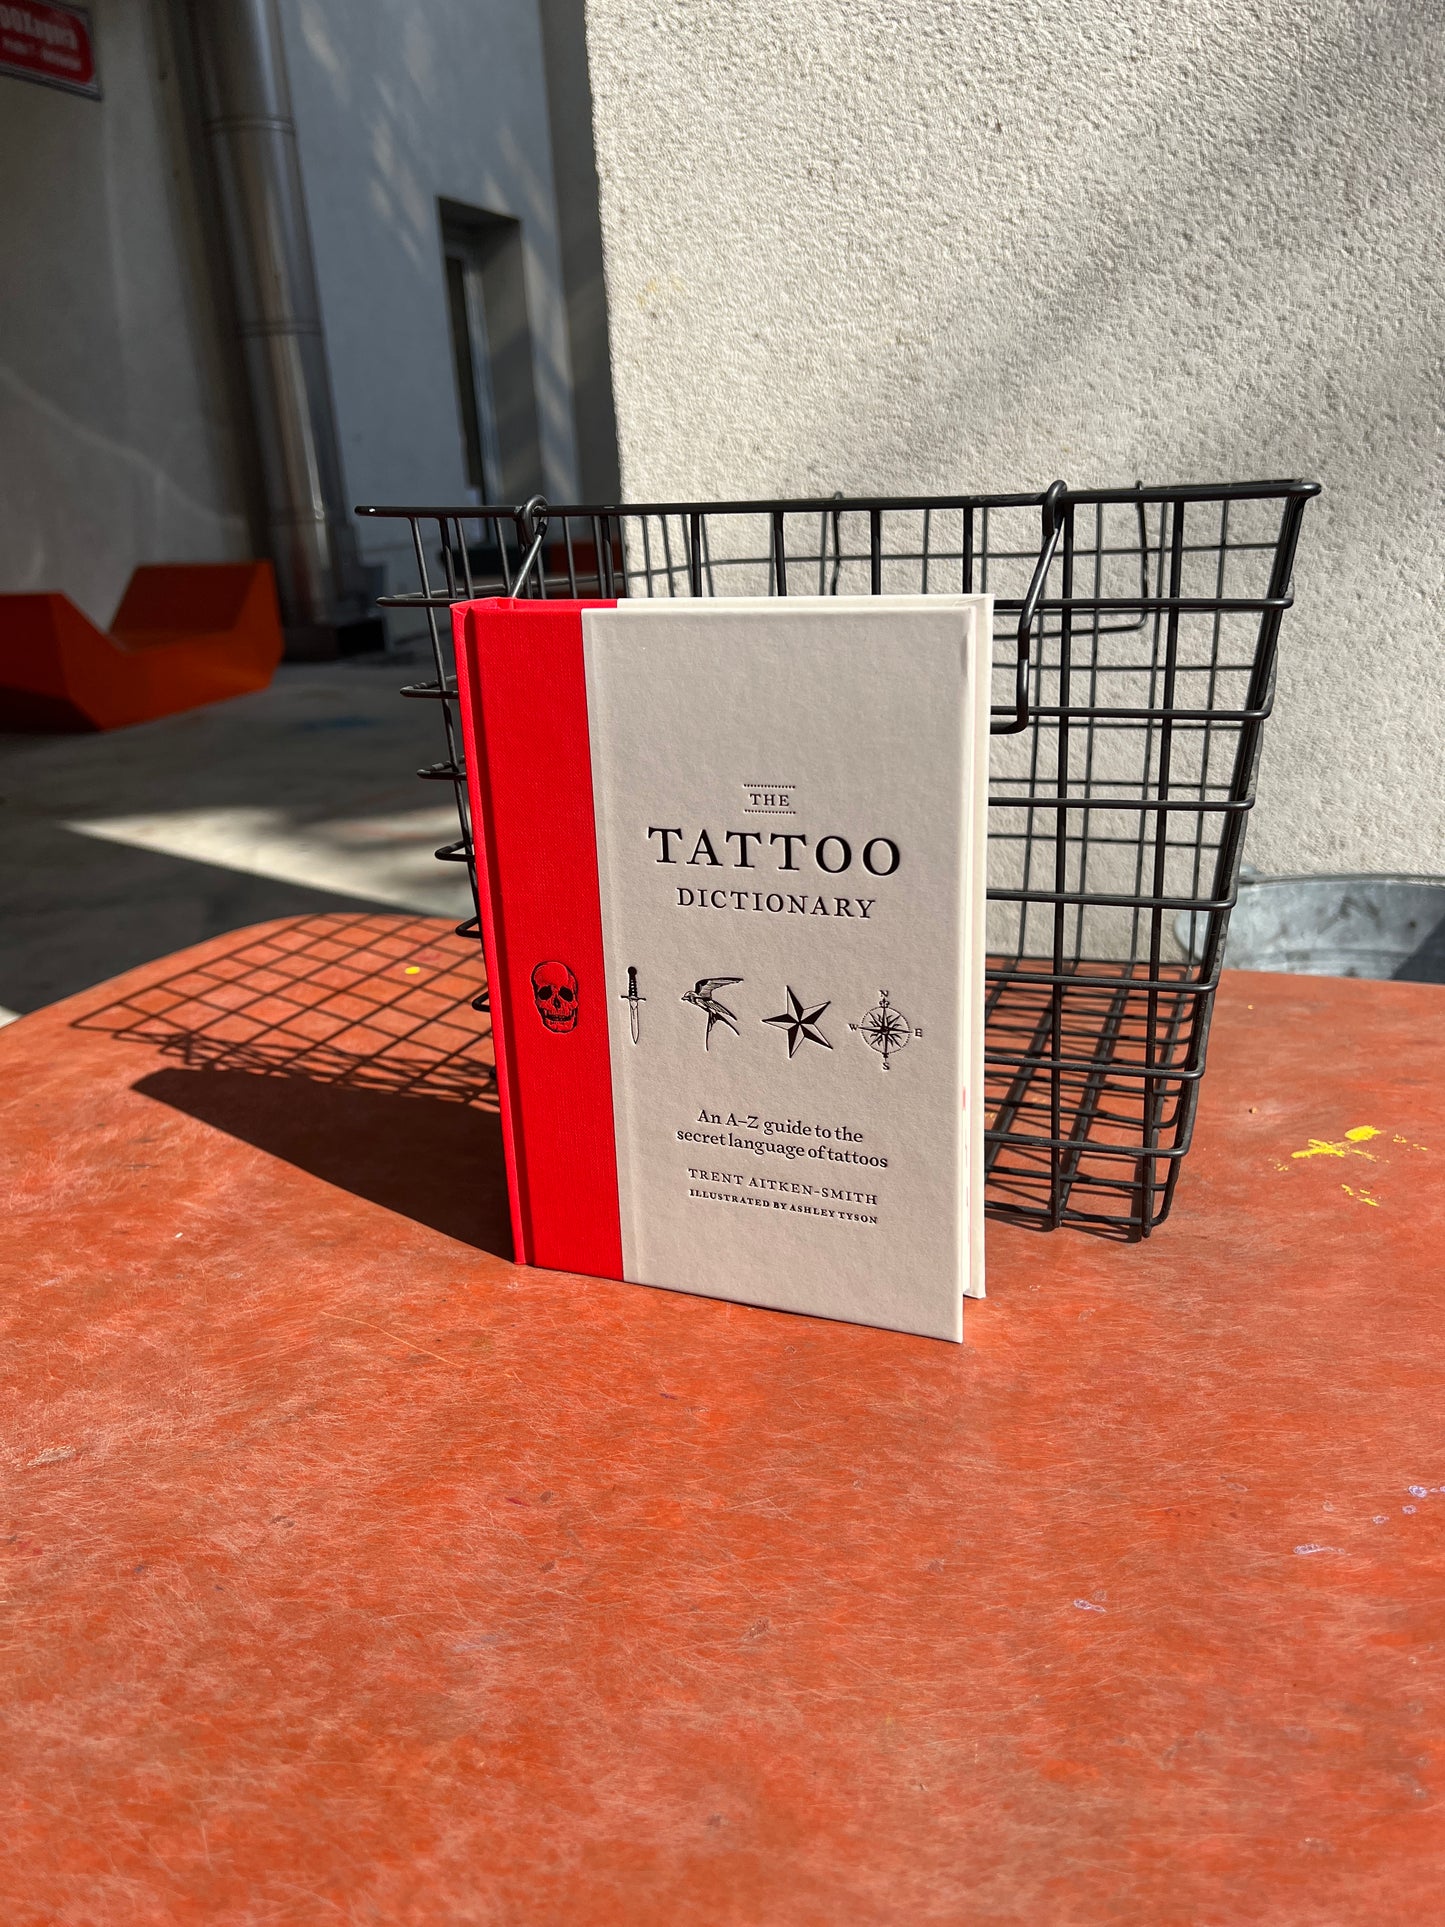 The Tattoo Dictionary: An AZ Guide to the Secret Language of Tattoos